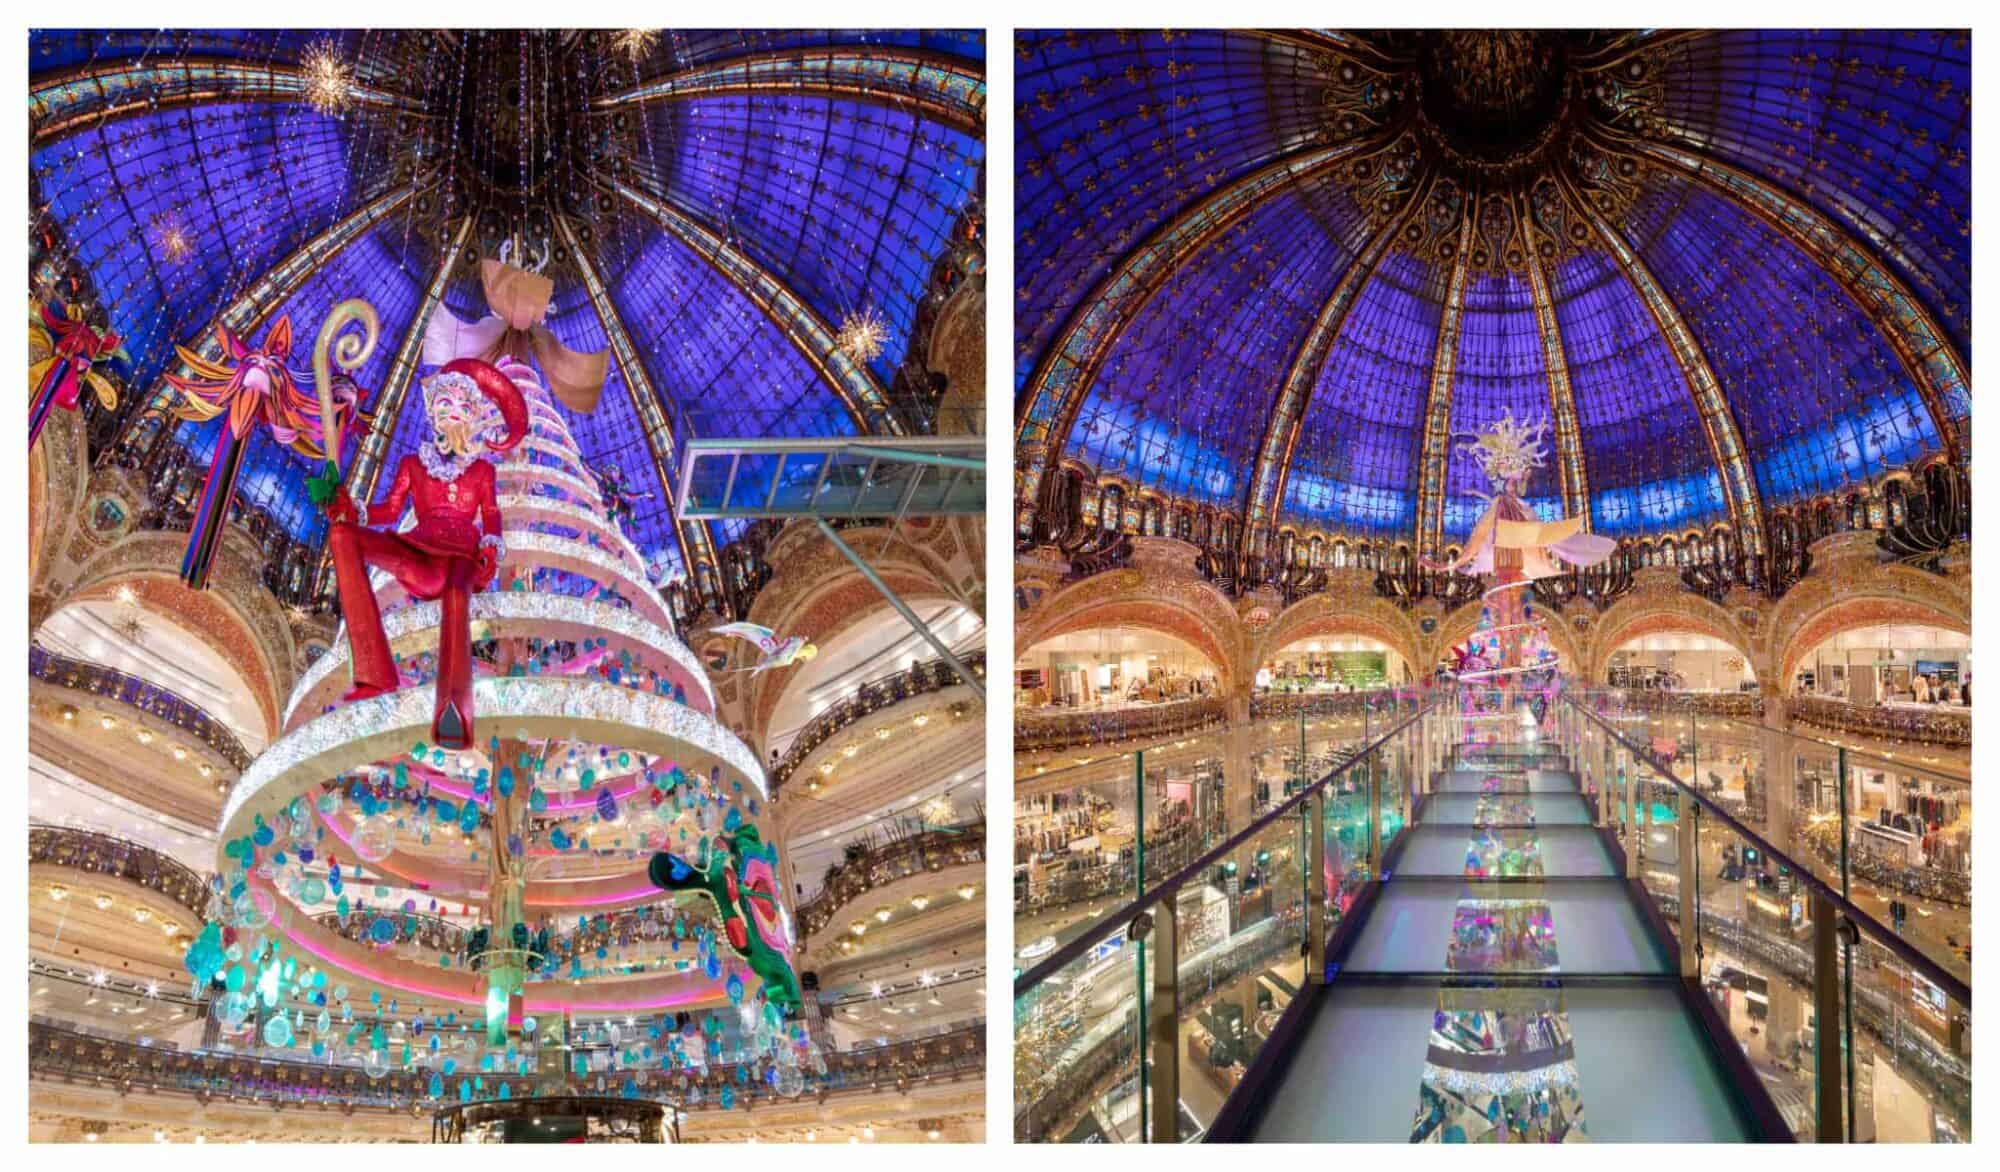 left: The Christmas tree from Galeries Lafayette pictured from the ground up under the cupola at night with a giant dandy Santa Claus dressed in red; right a view of the top of the tree from the walk way at the top floor of Galeries Lafayette.